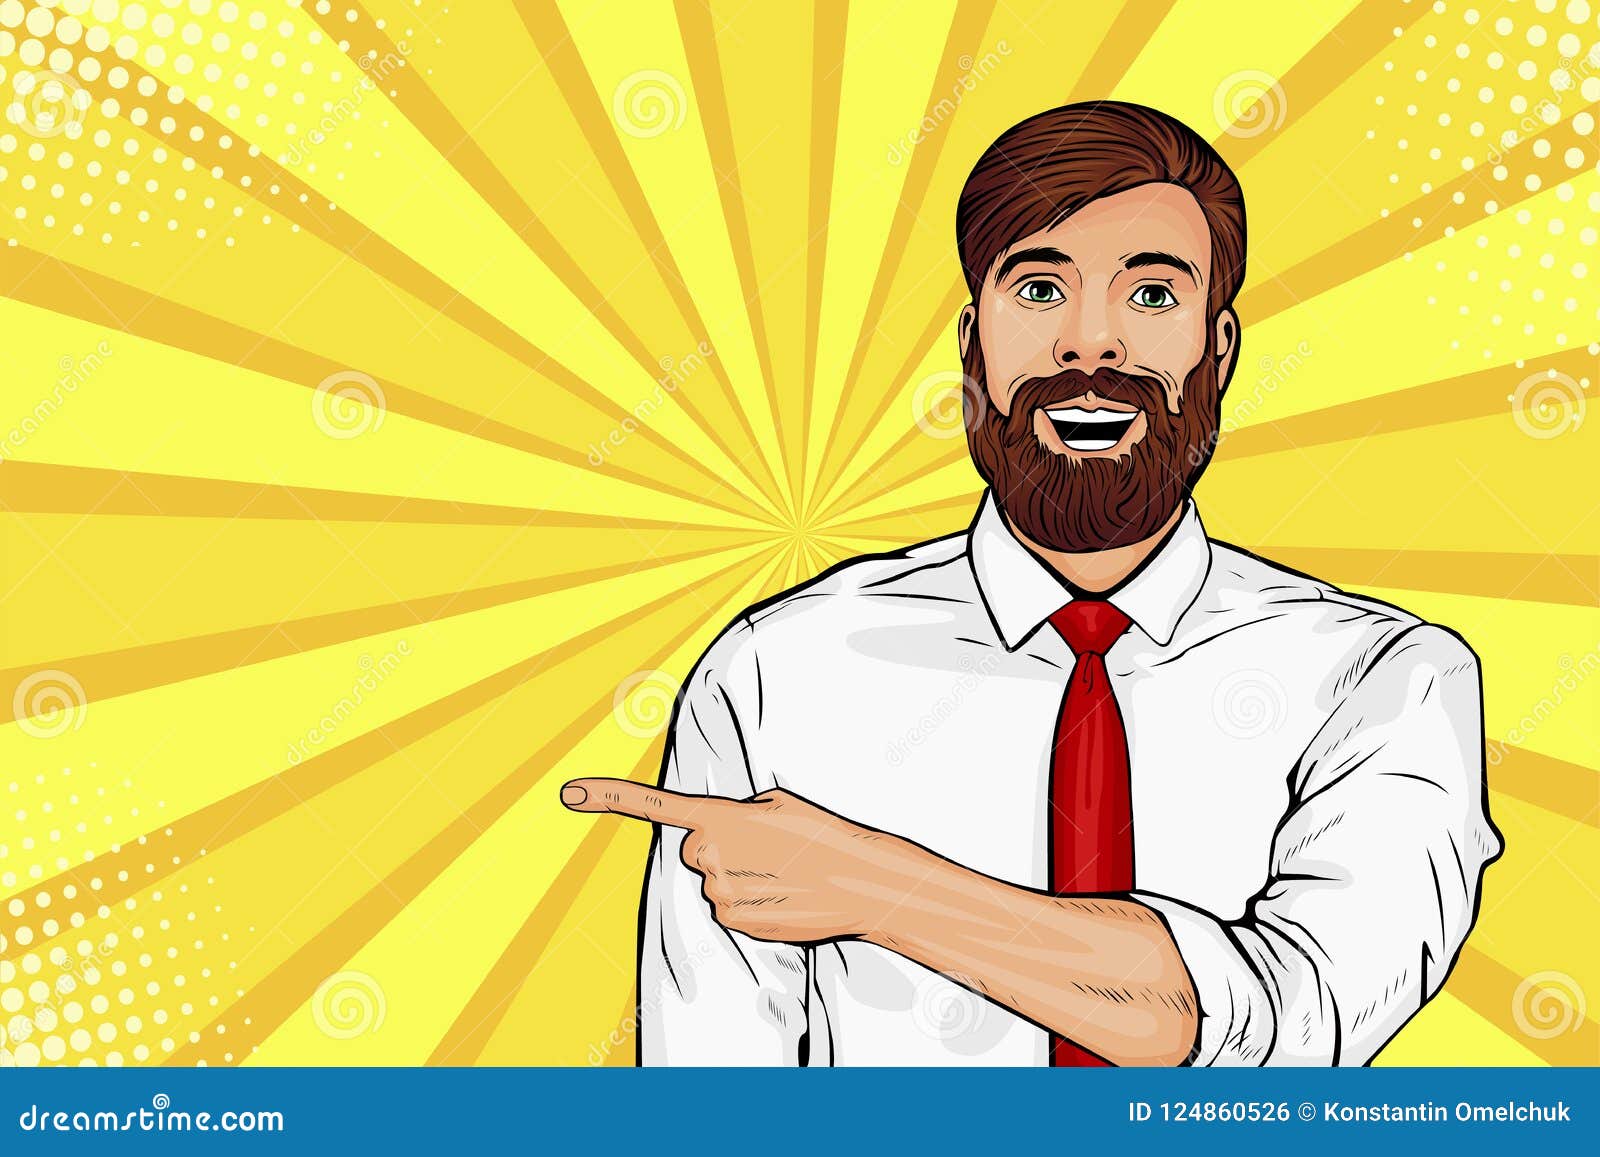 Pop art vector illustration of hipster man with wow surprised face